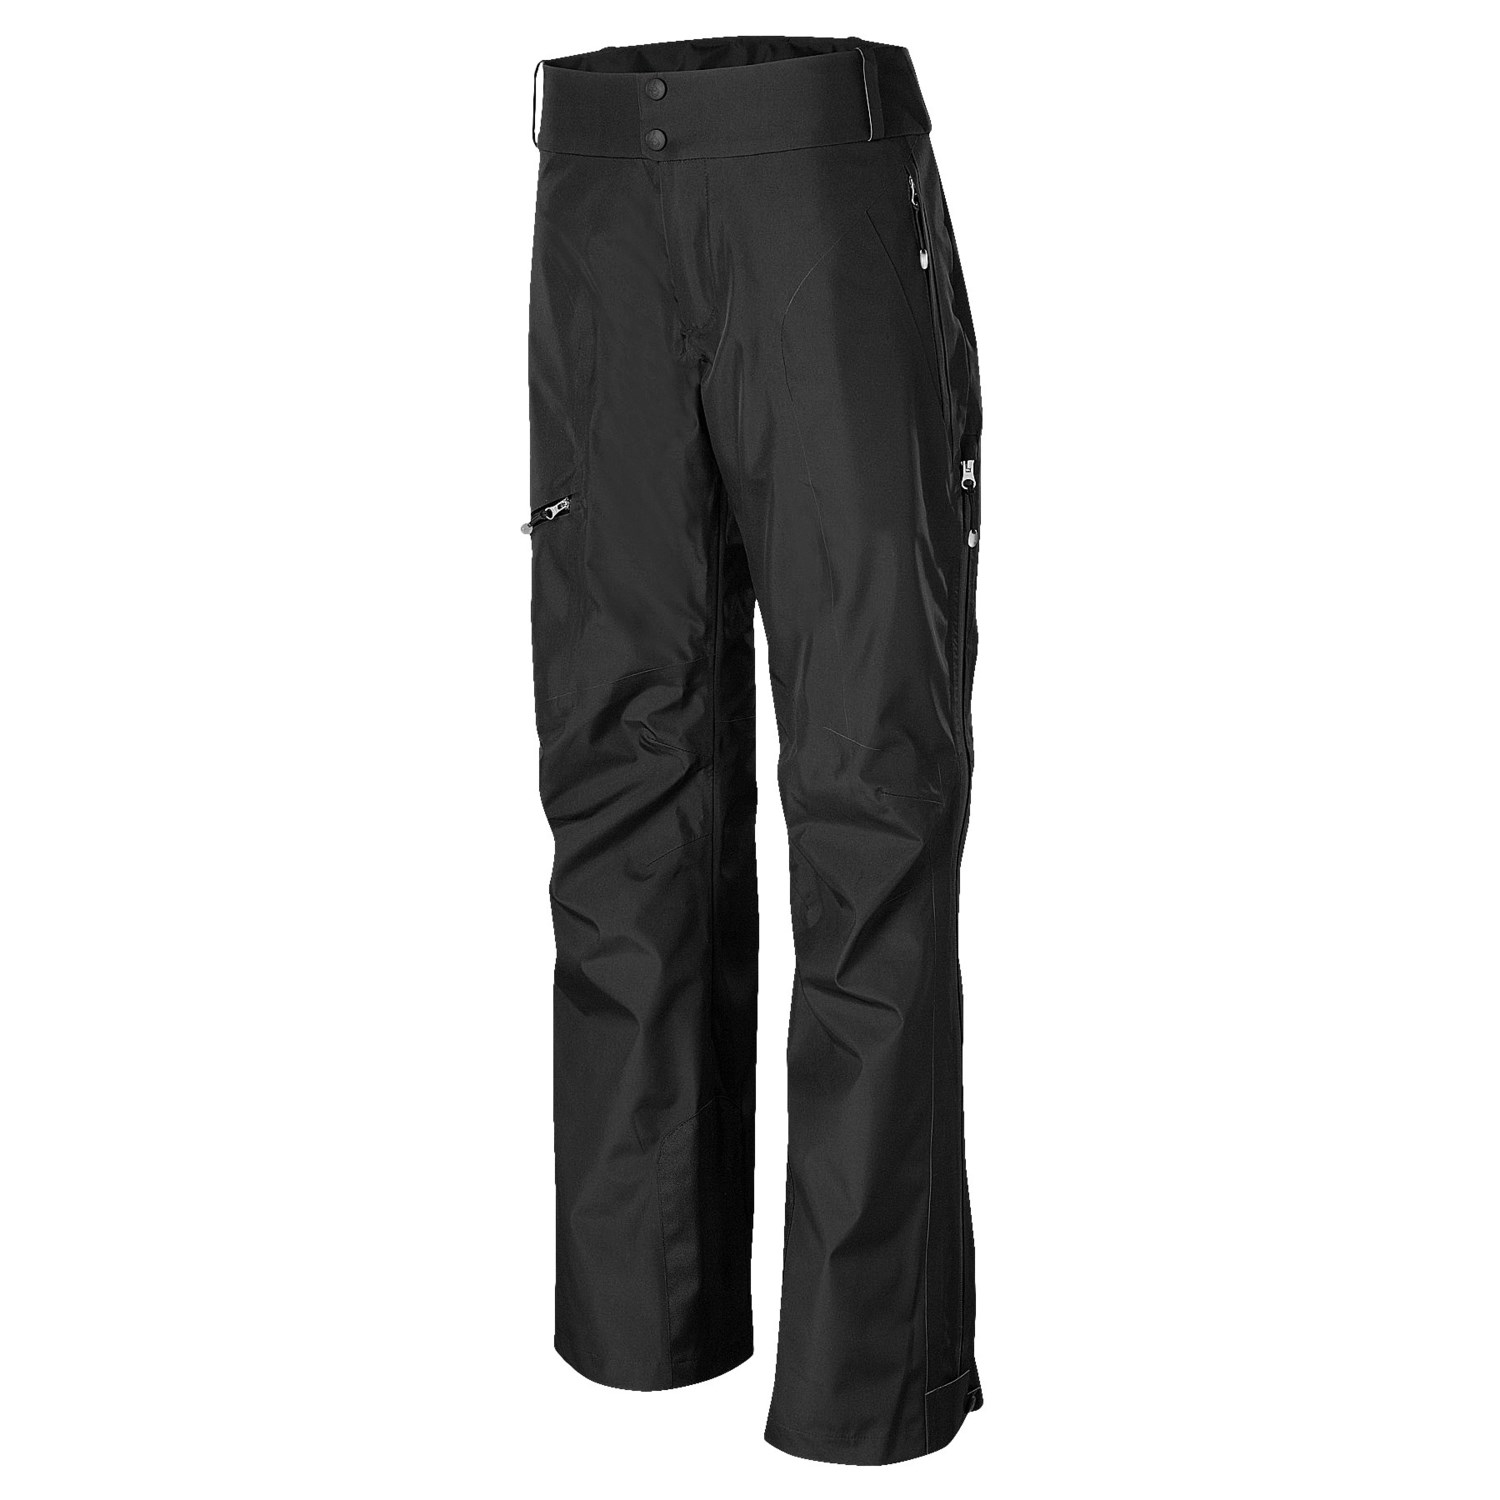 Isis Alta 3L Snow Pants (For Women) - Save 40%